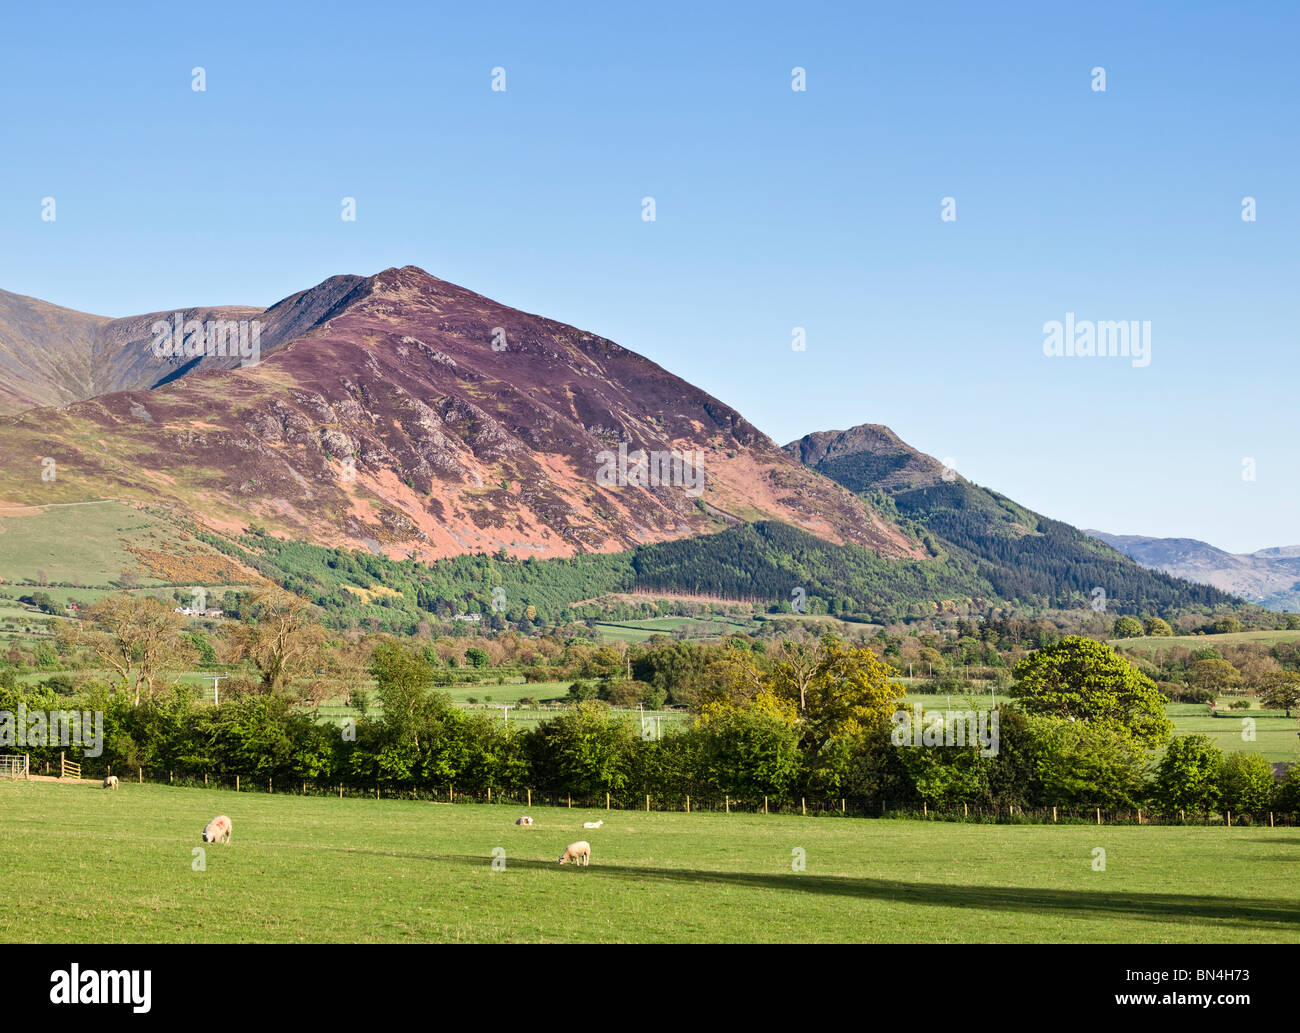 Skiddaw mountain, Lake District, Cumbria, England, UK Banque D'Images